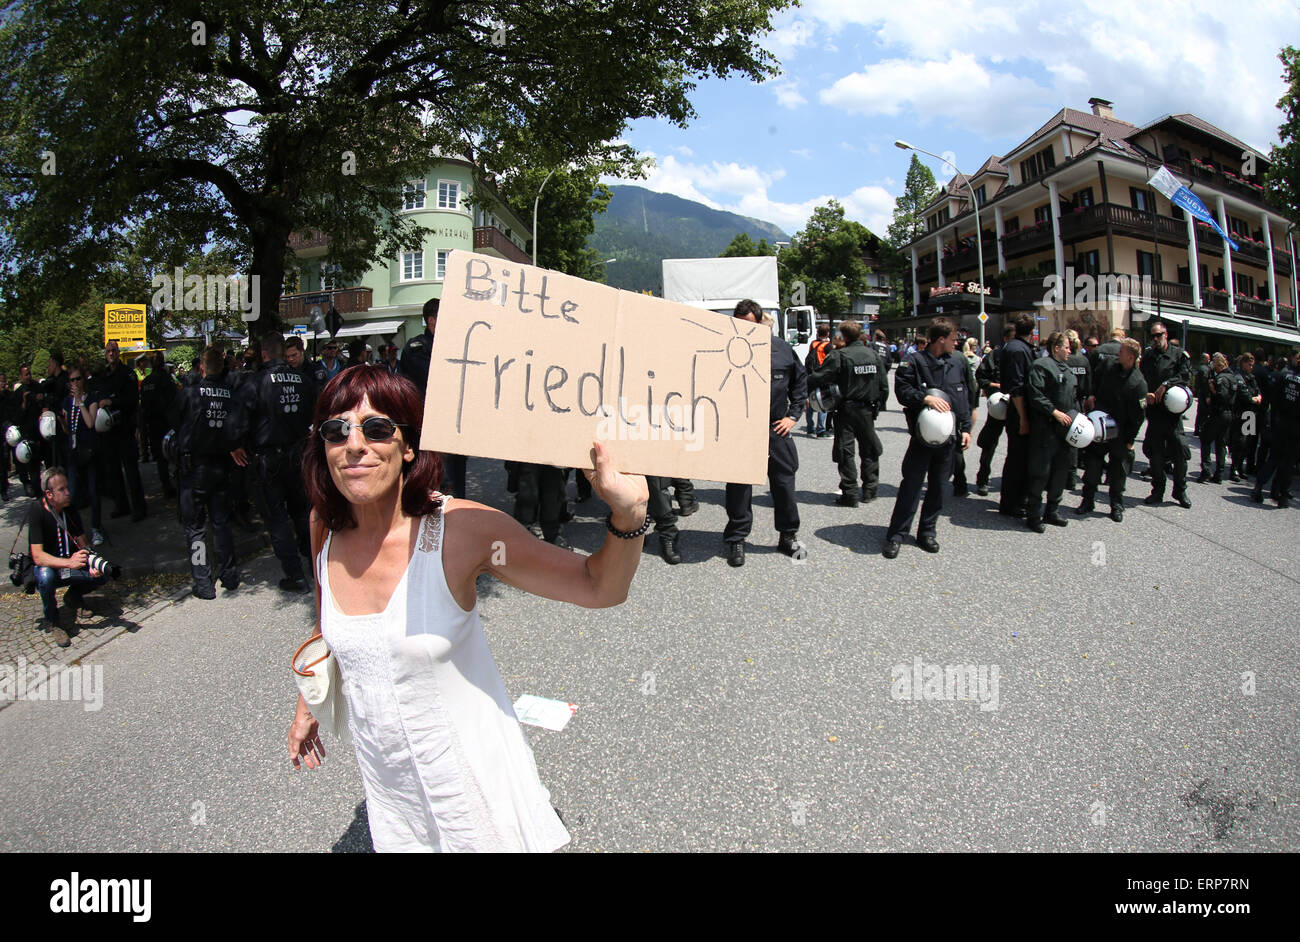 Garmisch-Partenkirchen, Germany. 06th June, 2015. A woman holds a sign reading 'Bitte friedlich' (lit. Peacefully please) in Garmisch-Partenkirchen, Germany, 06 June 2015. Heads of state and government of the seven leading industrialized nations (G7) are scheduled to meet in Elmau Castle, Bavaria, on June 7-8 as the climax of Germany's presidency of the G7. Photo: CHRISTIAN CHARISIUS/dpa/Alamy Live News Stock Photo